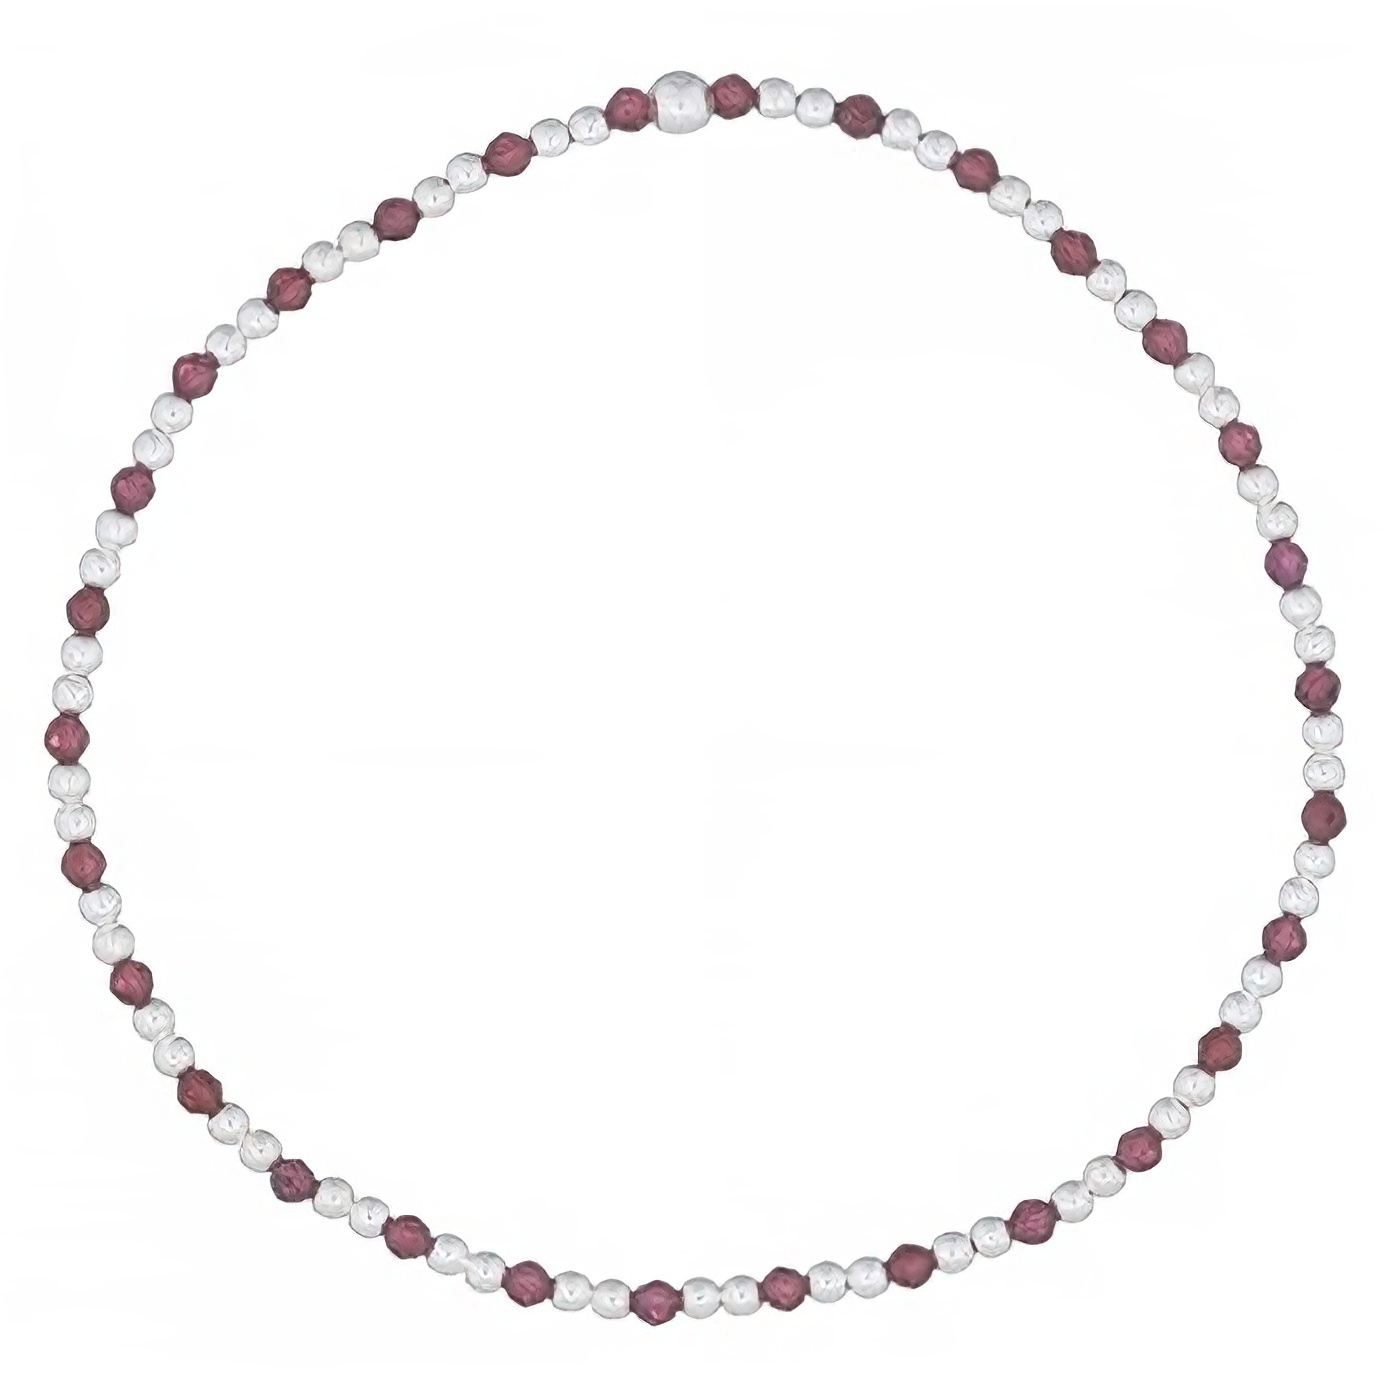 Two Silver Spheres Spacer With Garnet Stretchable Bracelet by BeYindi 